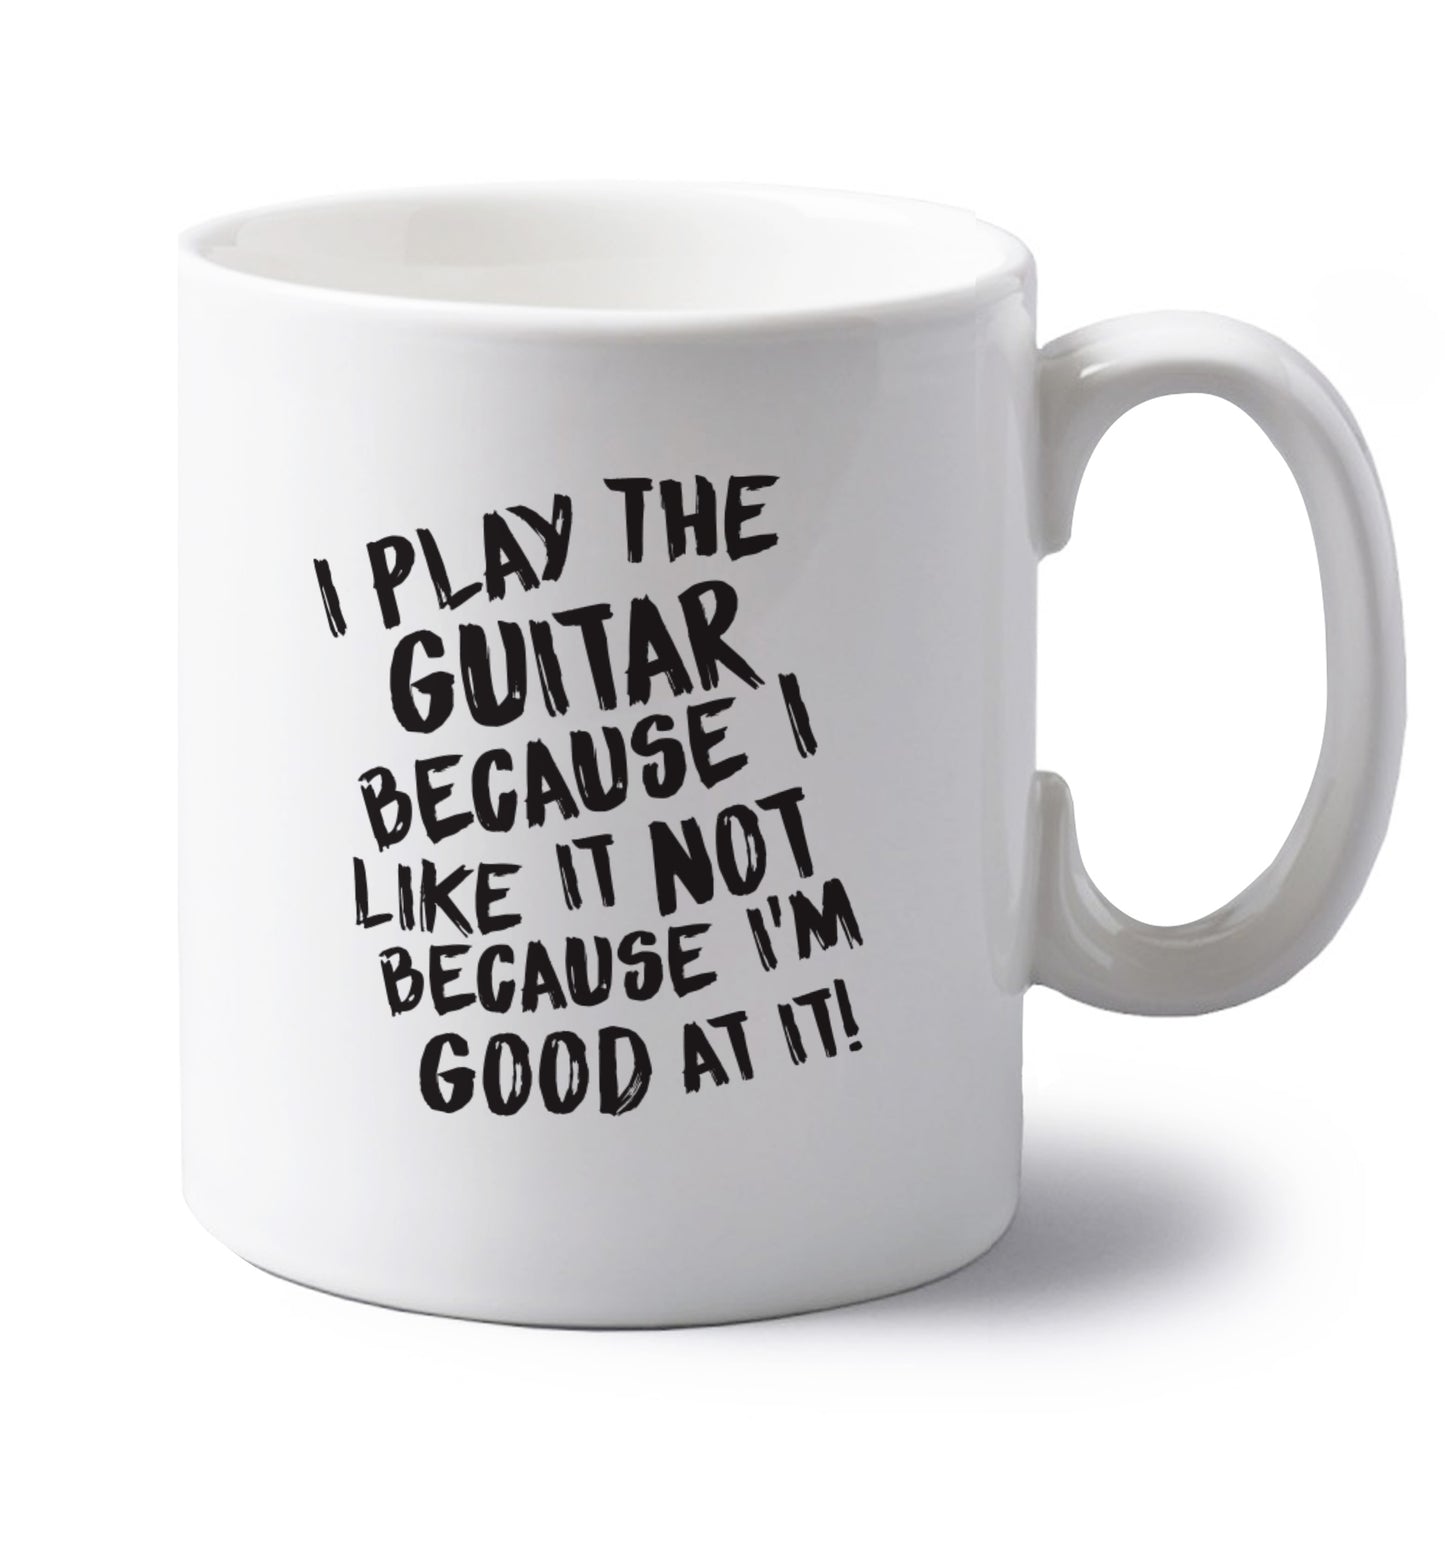 I play the guitar because I like it not because I'm good at it left handed white ceramic mug 